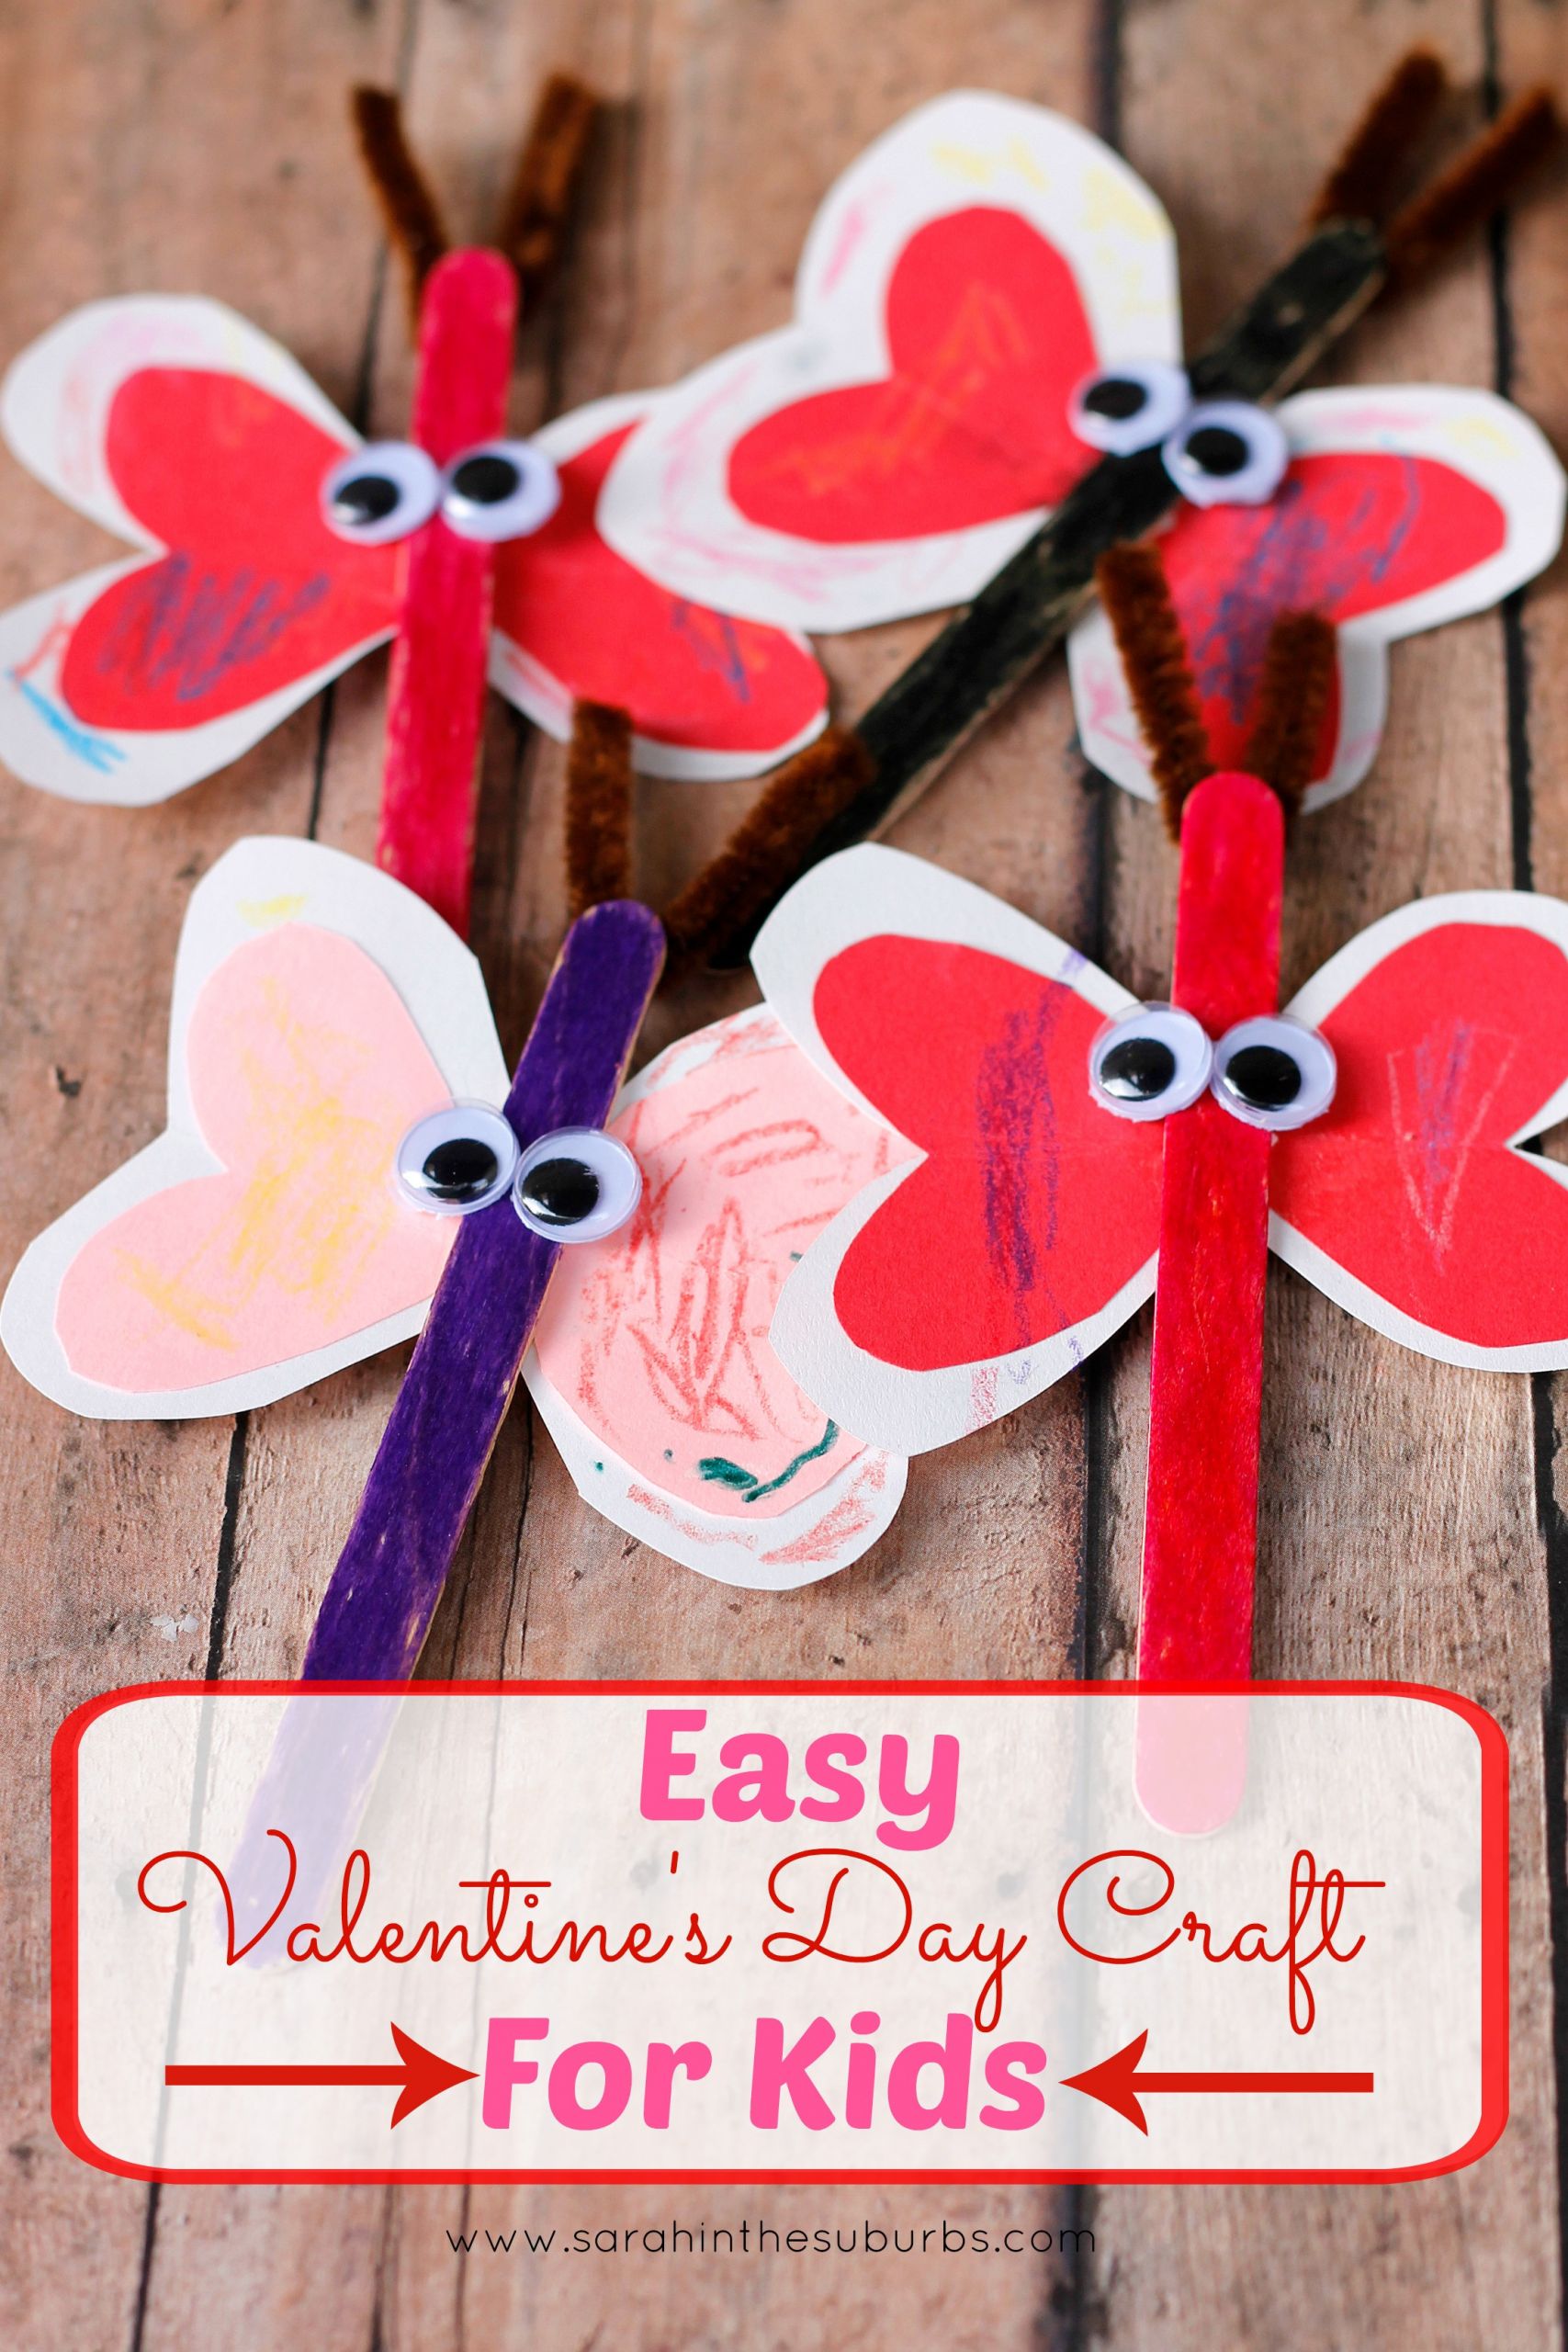 Easy Craft Ideas For Toddlers
 Love Bug Valentine s Day Craft for Kids Sarah in the Suburbs